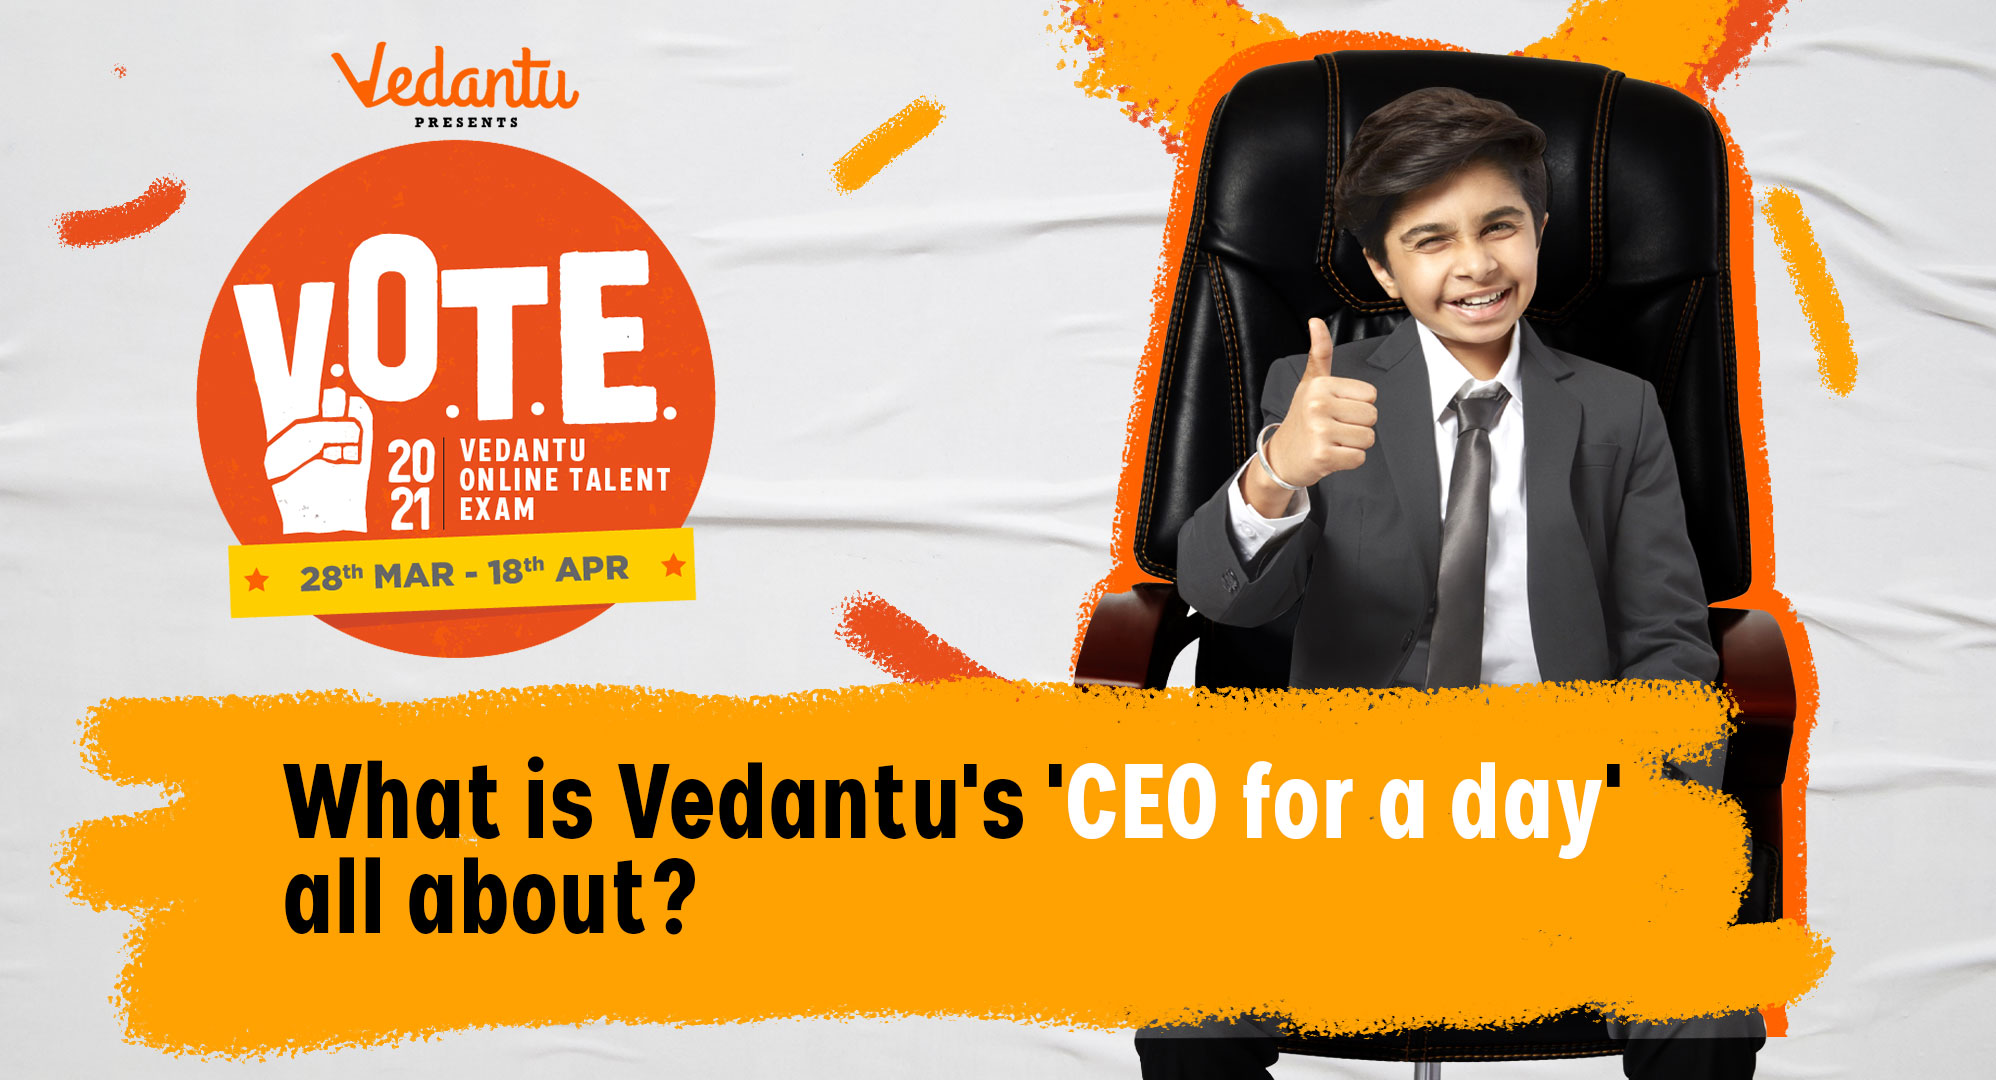 What is Vedantu's 'CEO for a Day' Programme all about?